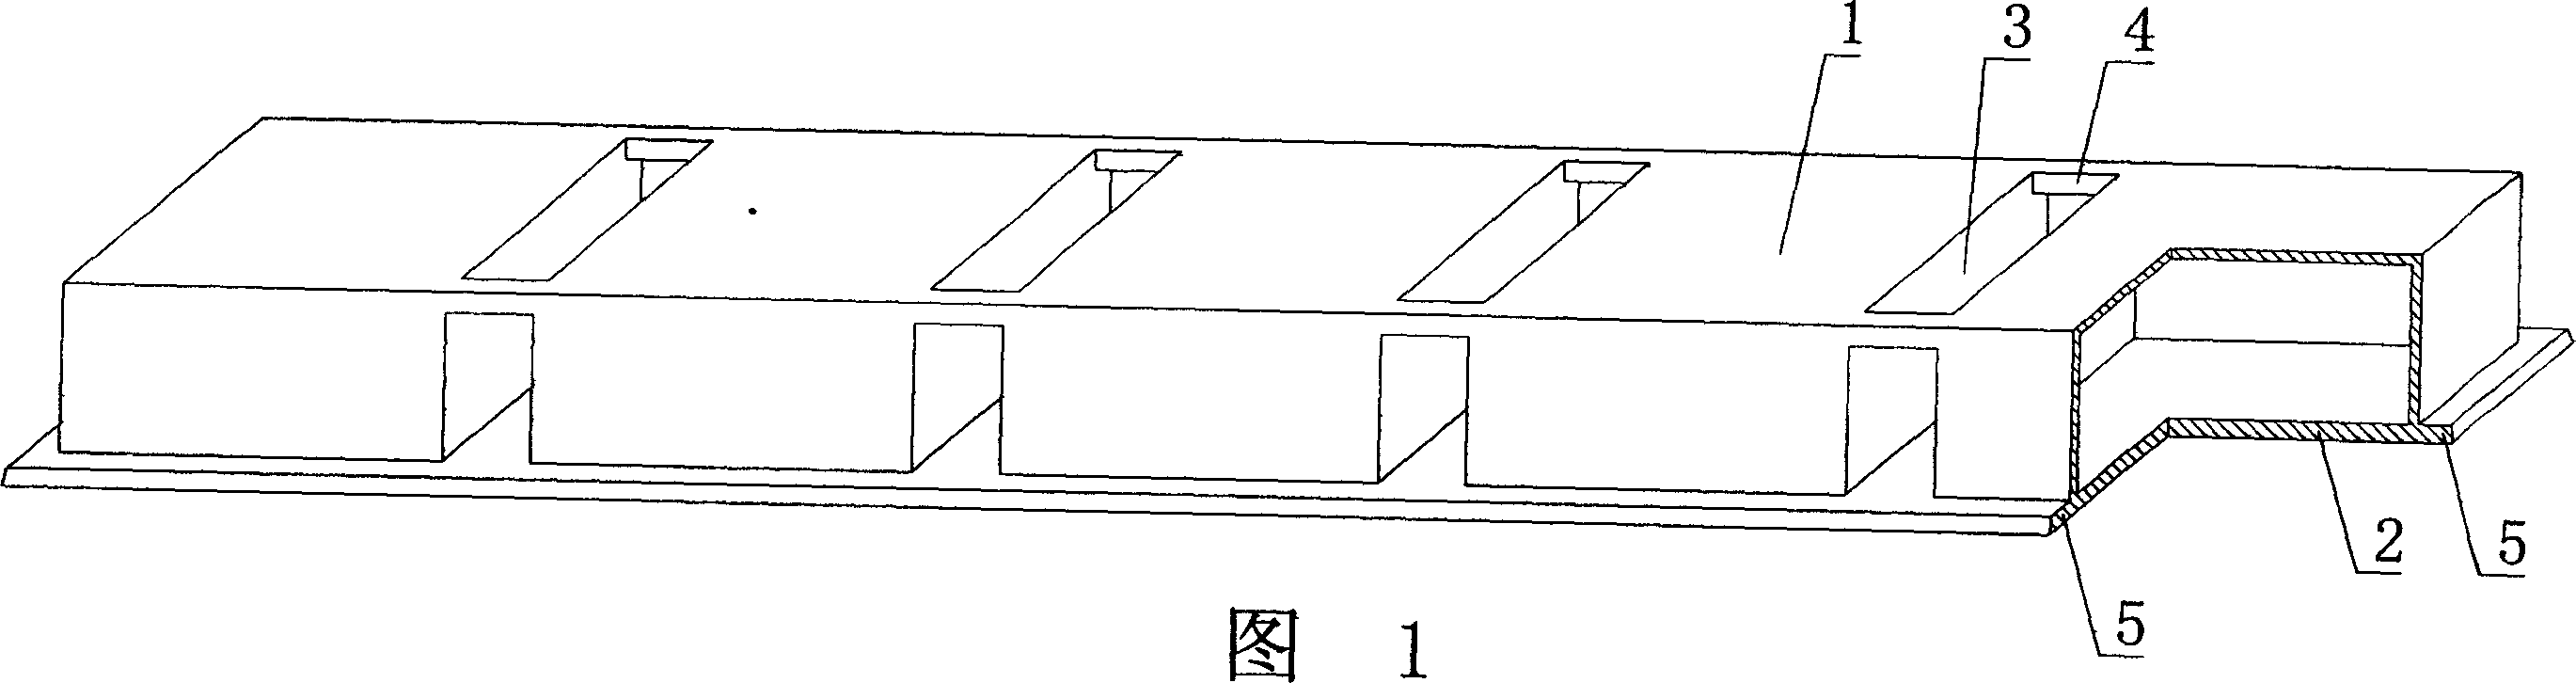 Cavity member for hollow slab